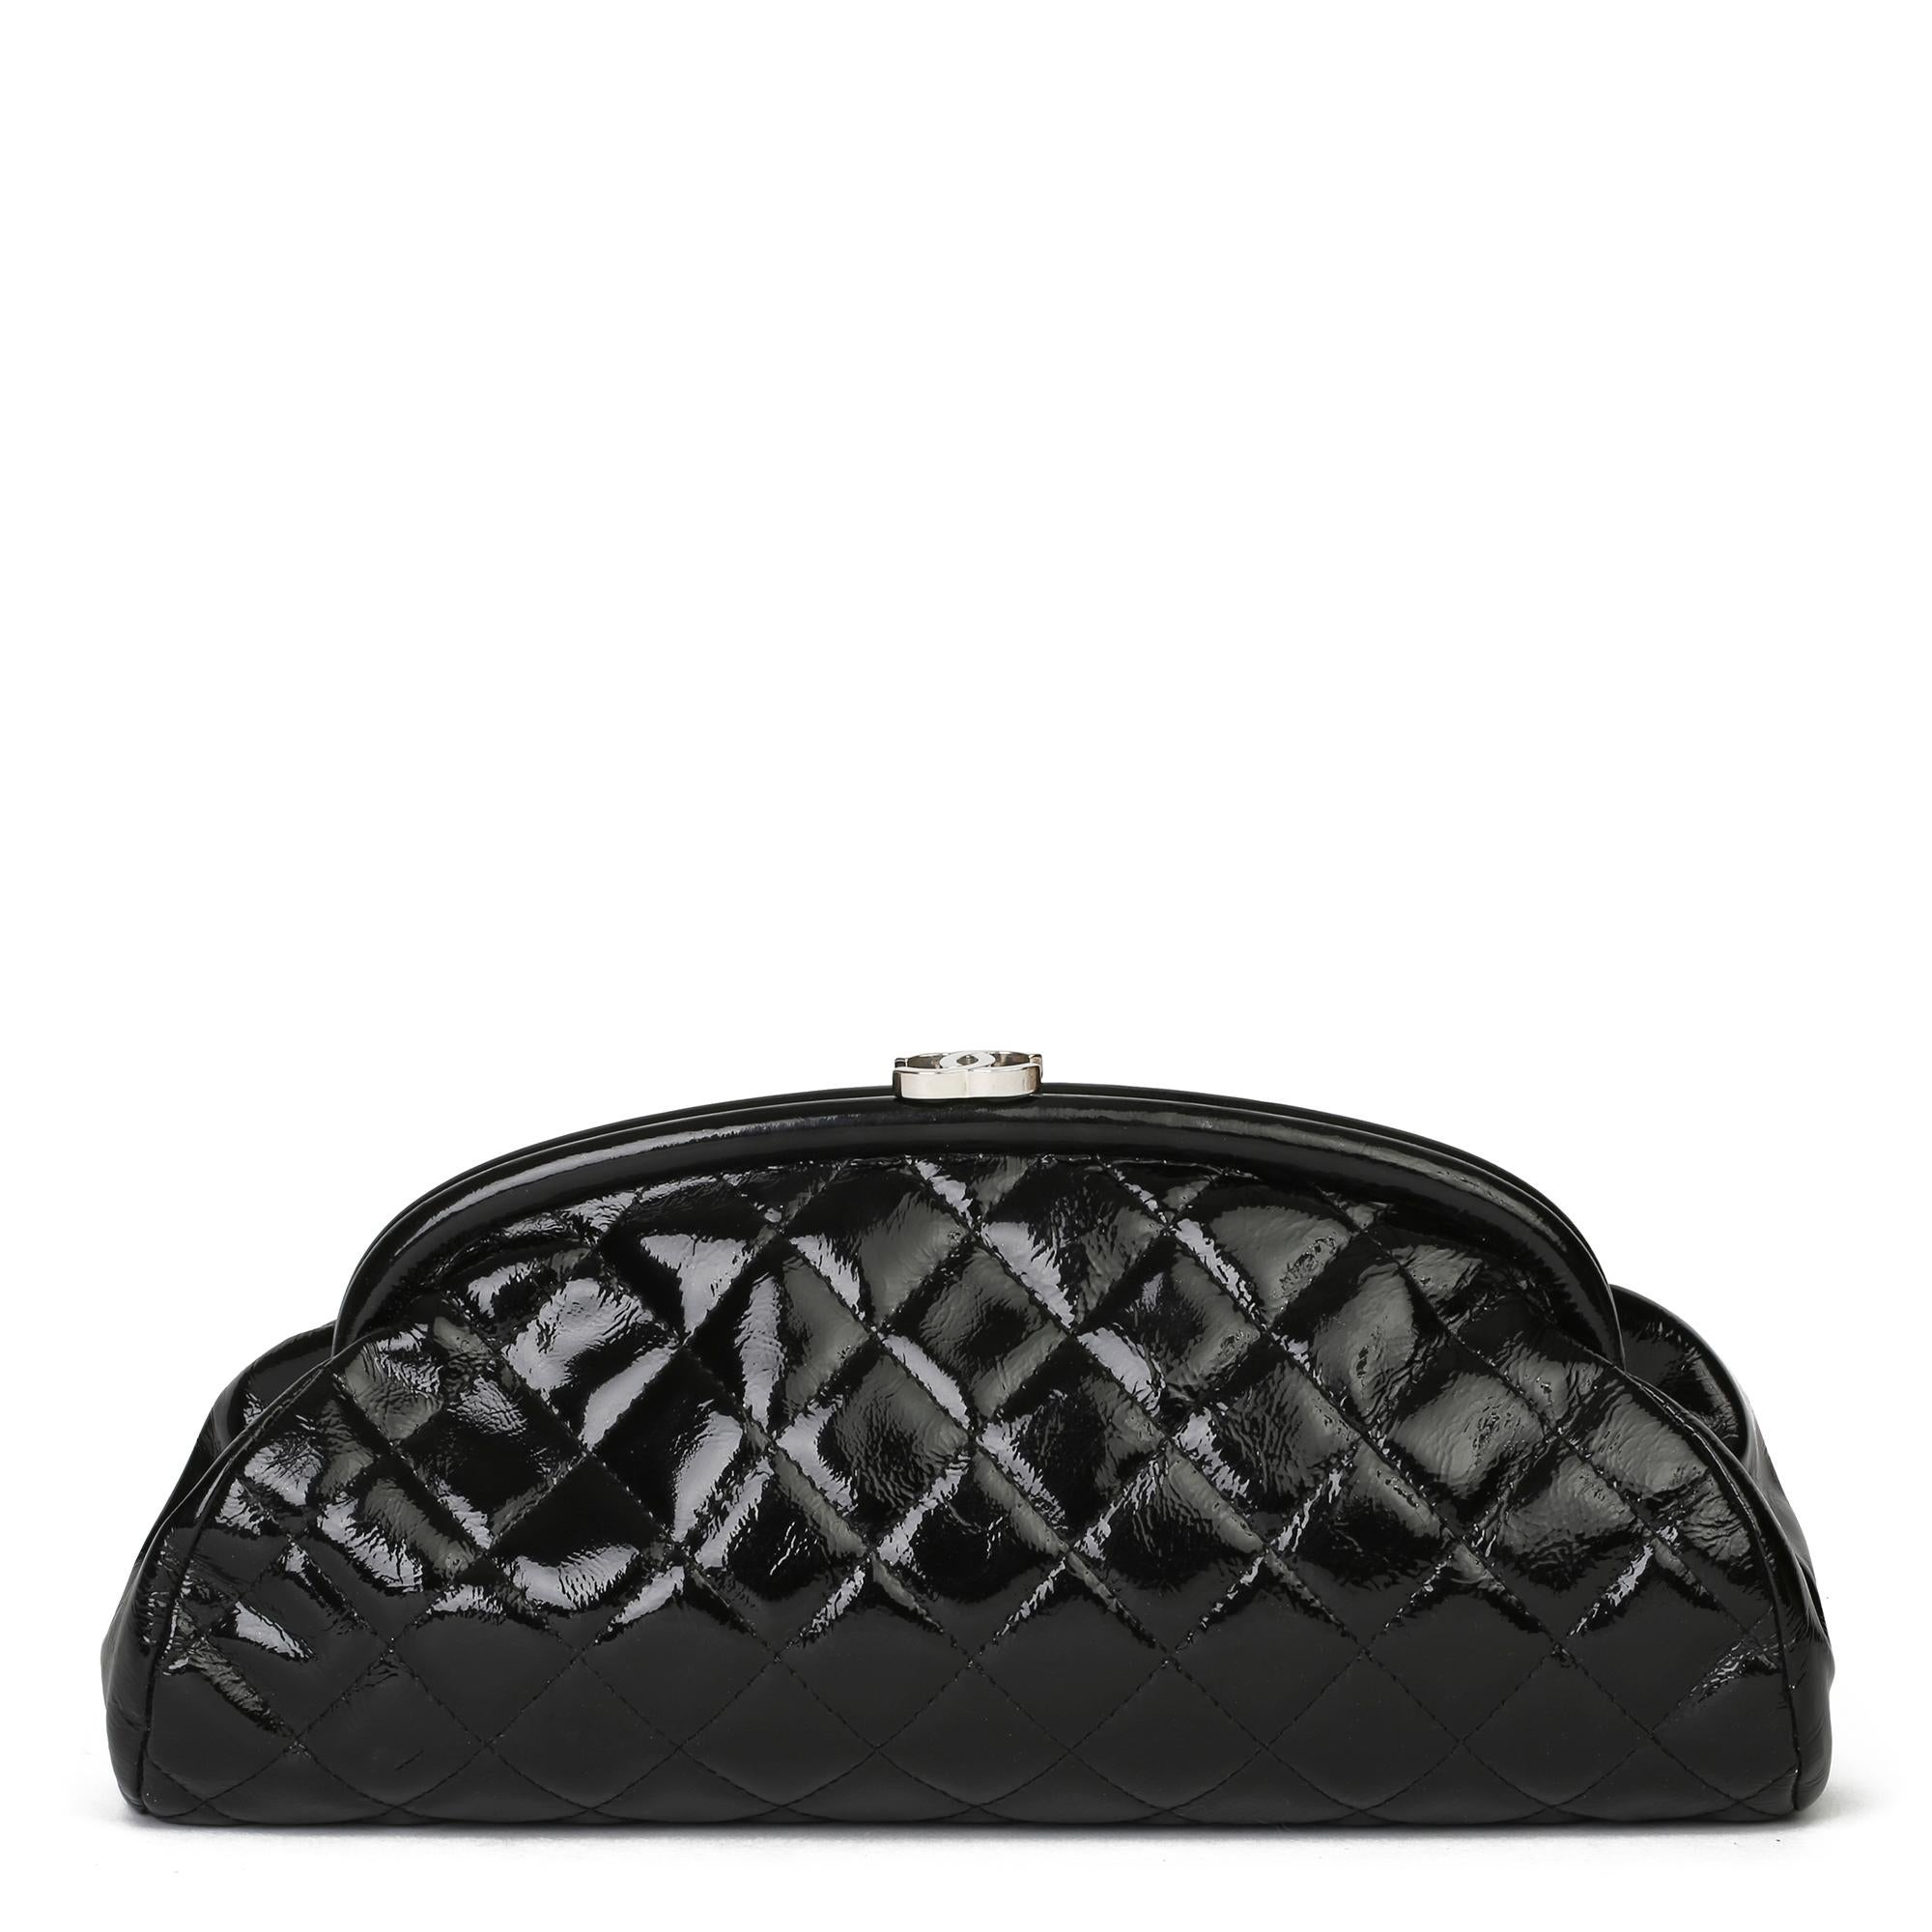 2007 Chanel Black Quilted Aged Patent Leather Timeless Clutch 1